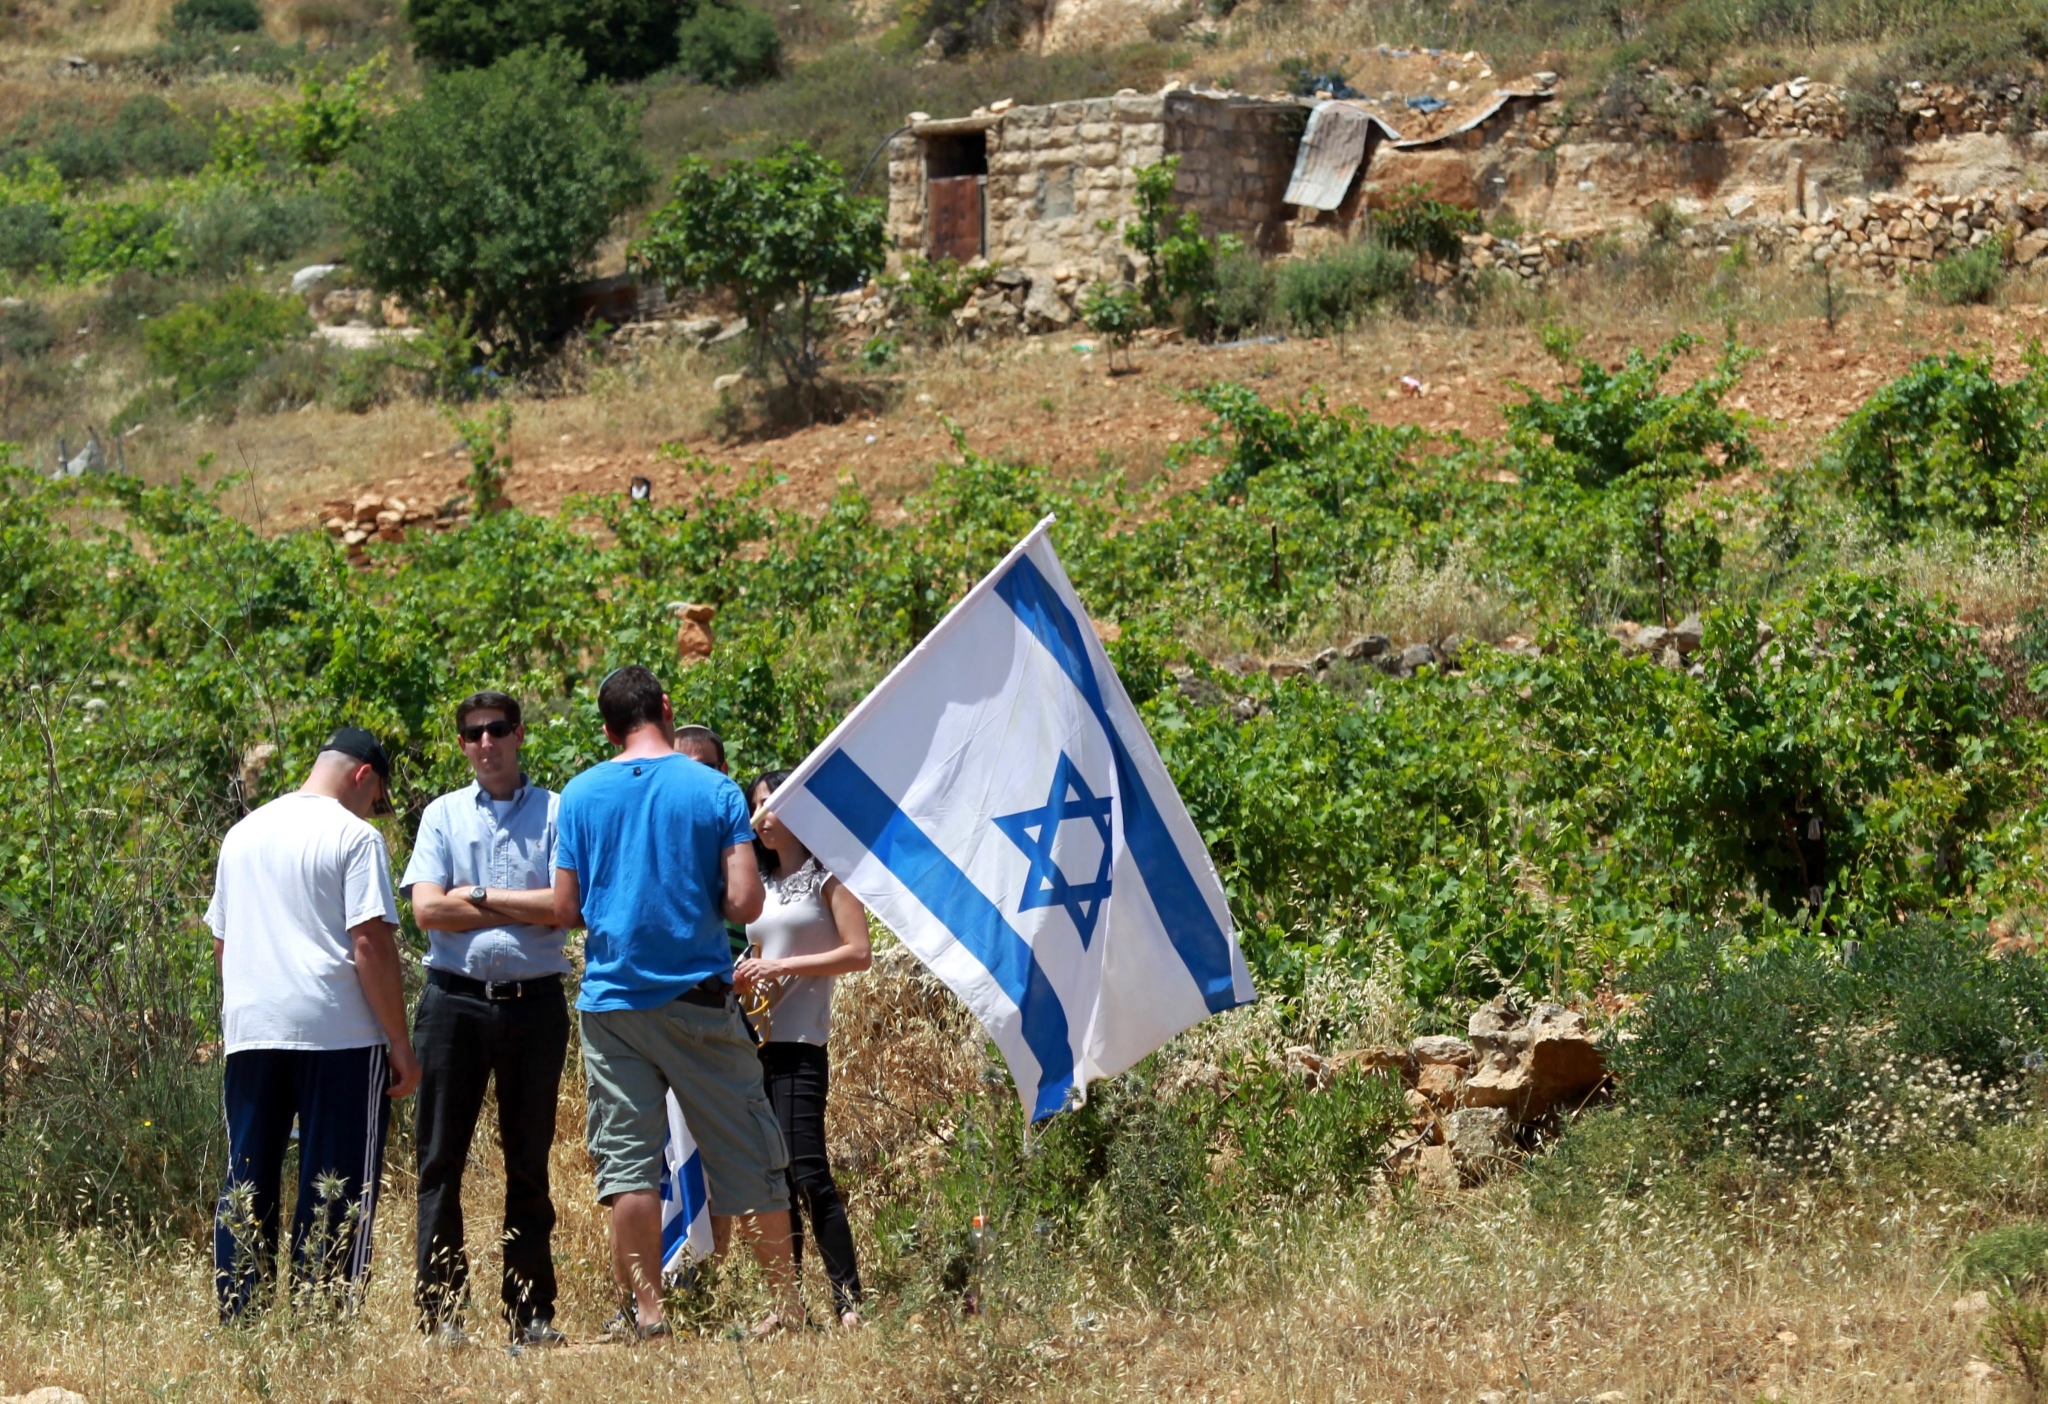 Israelis from settlements of Gush Etzion and Kiryat Arba in the occupied West Bank. Israel is now seeking approval for hundreds of settler homes in the northern West Bank. Photo: AFP